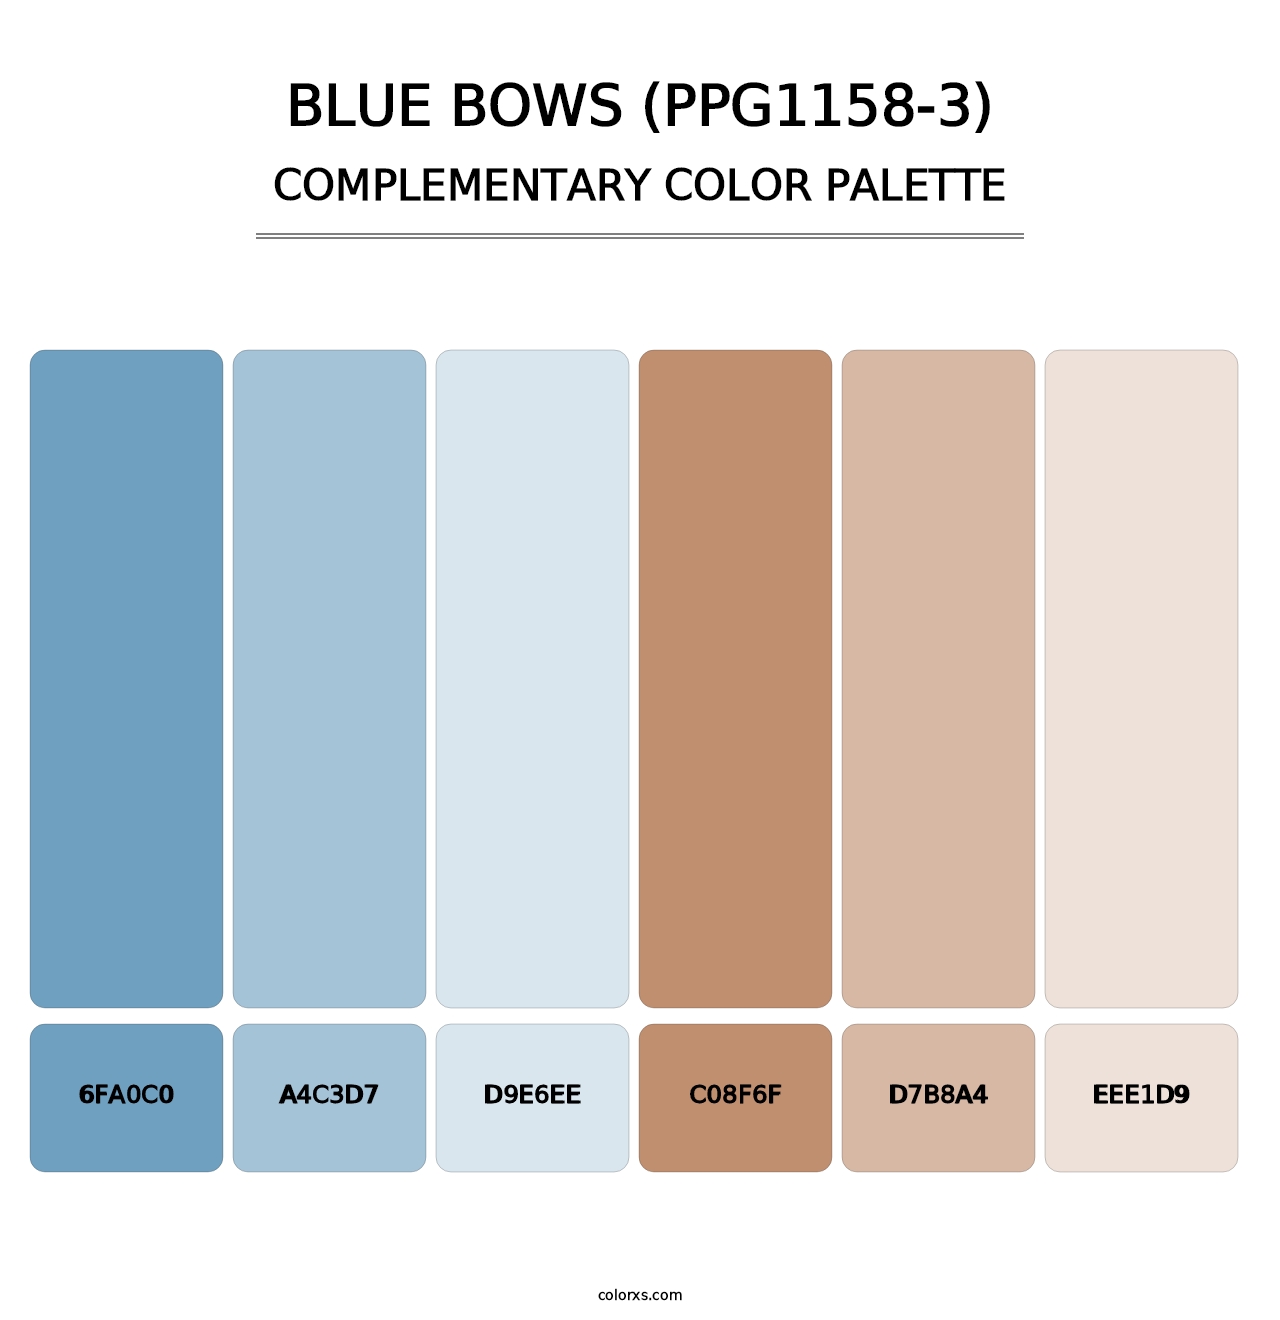 Blue Bows (PPG1158-3) - Complementary Color Palette